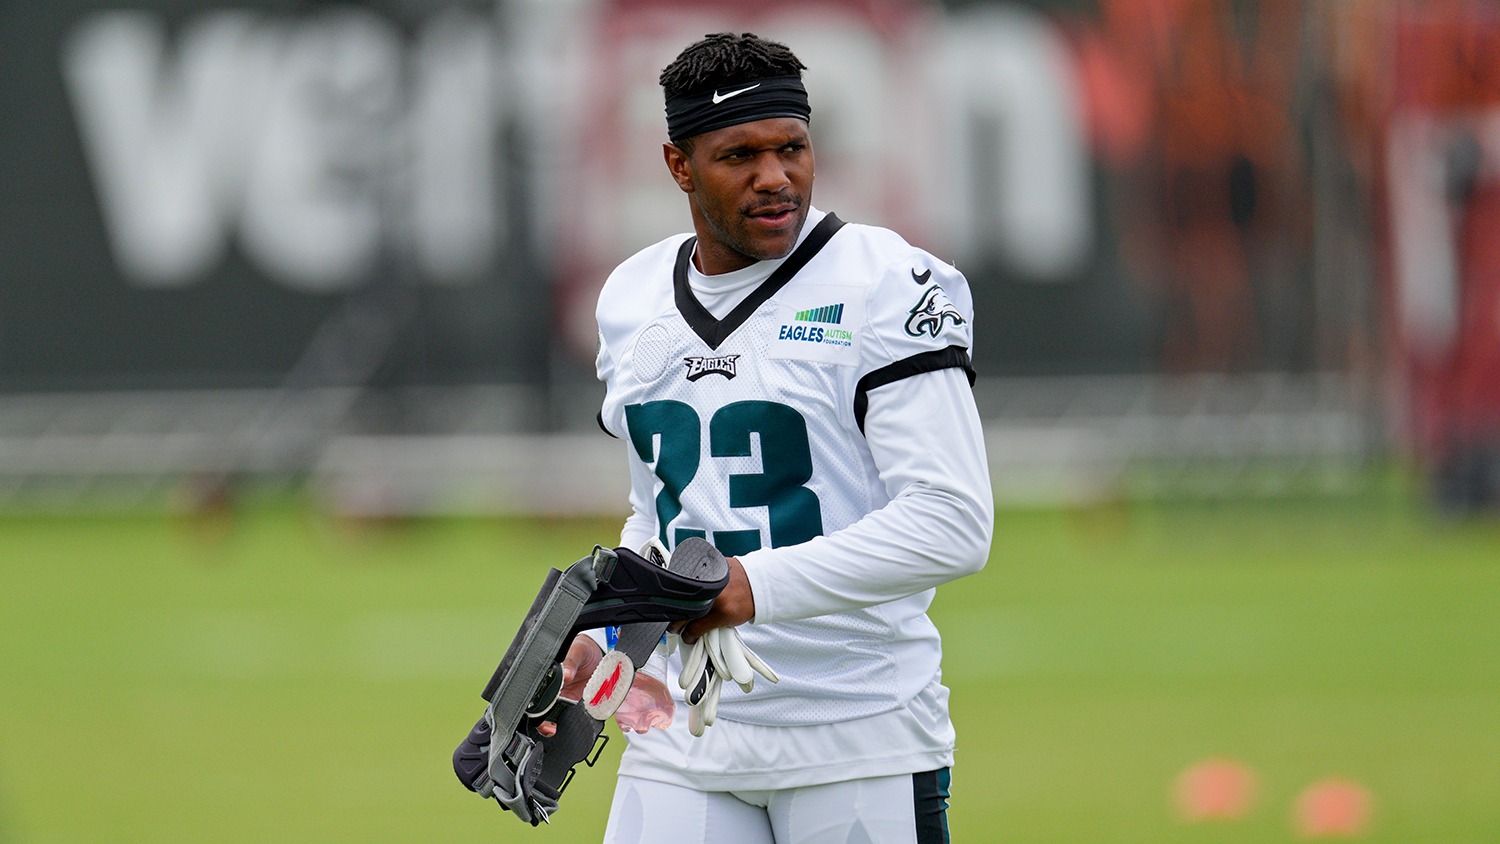 New Eagles safety K'Von Wallace has a notable fan in Hall of Famer